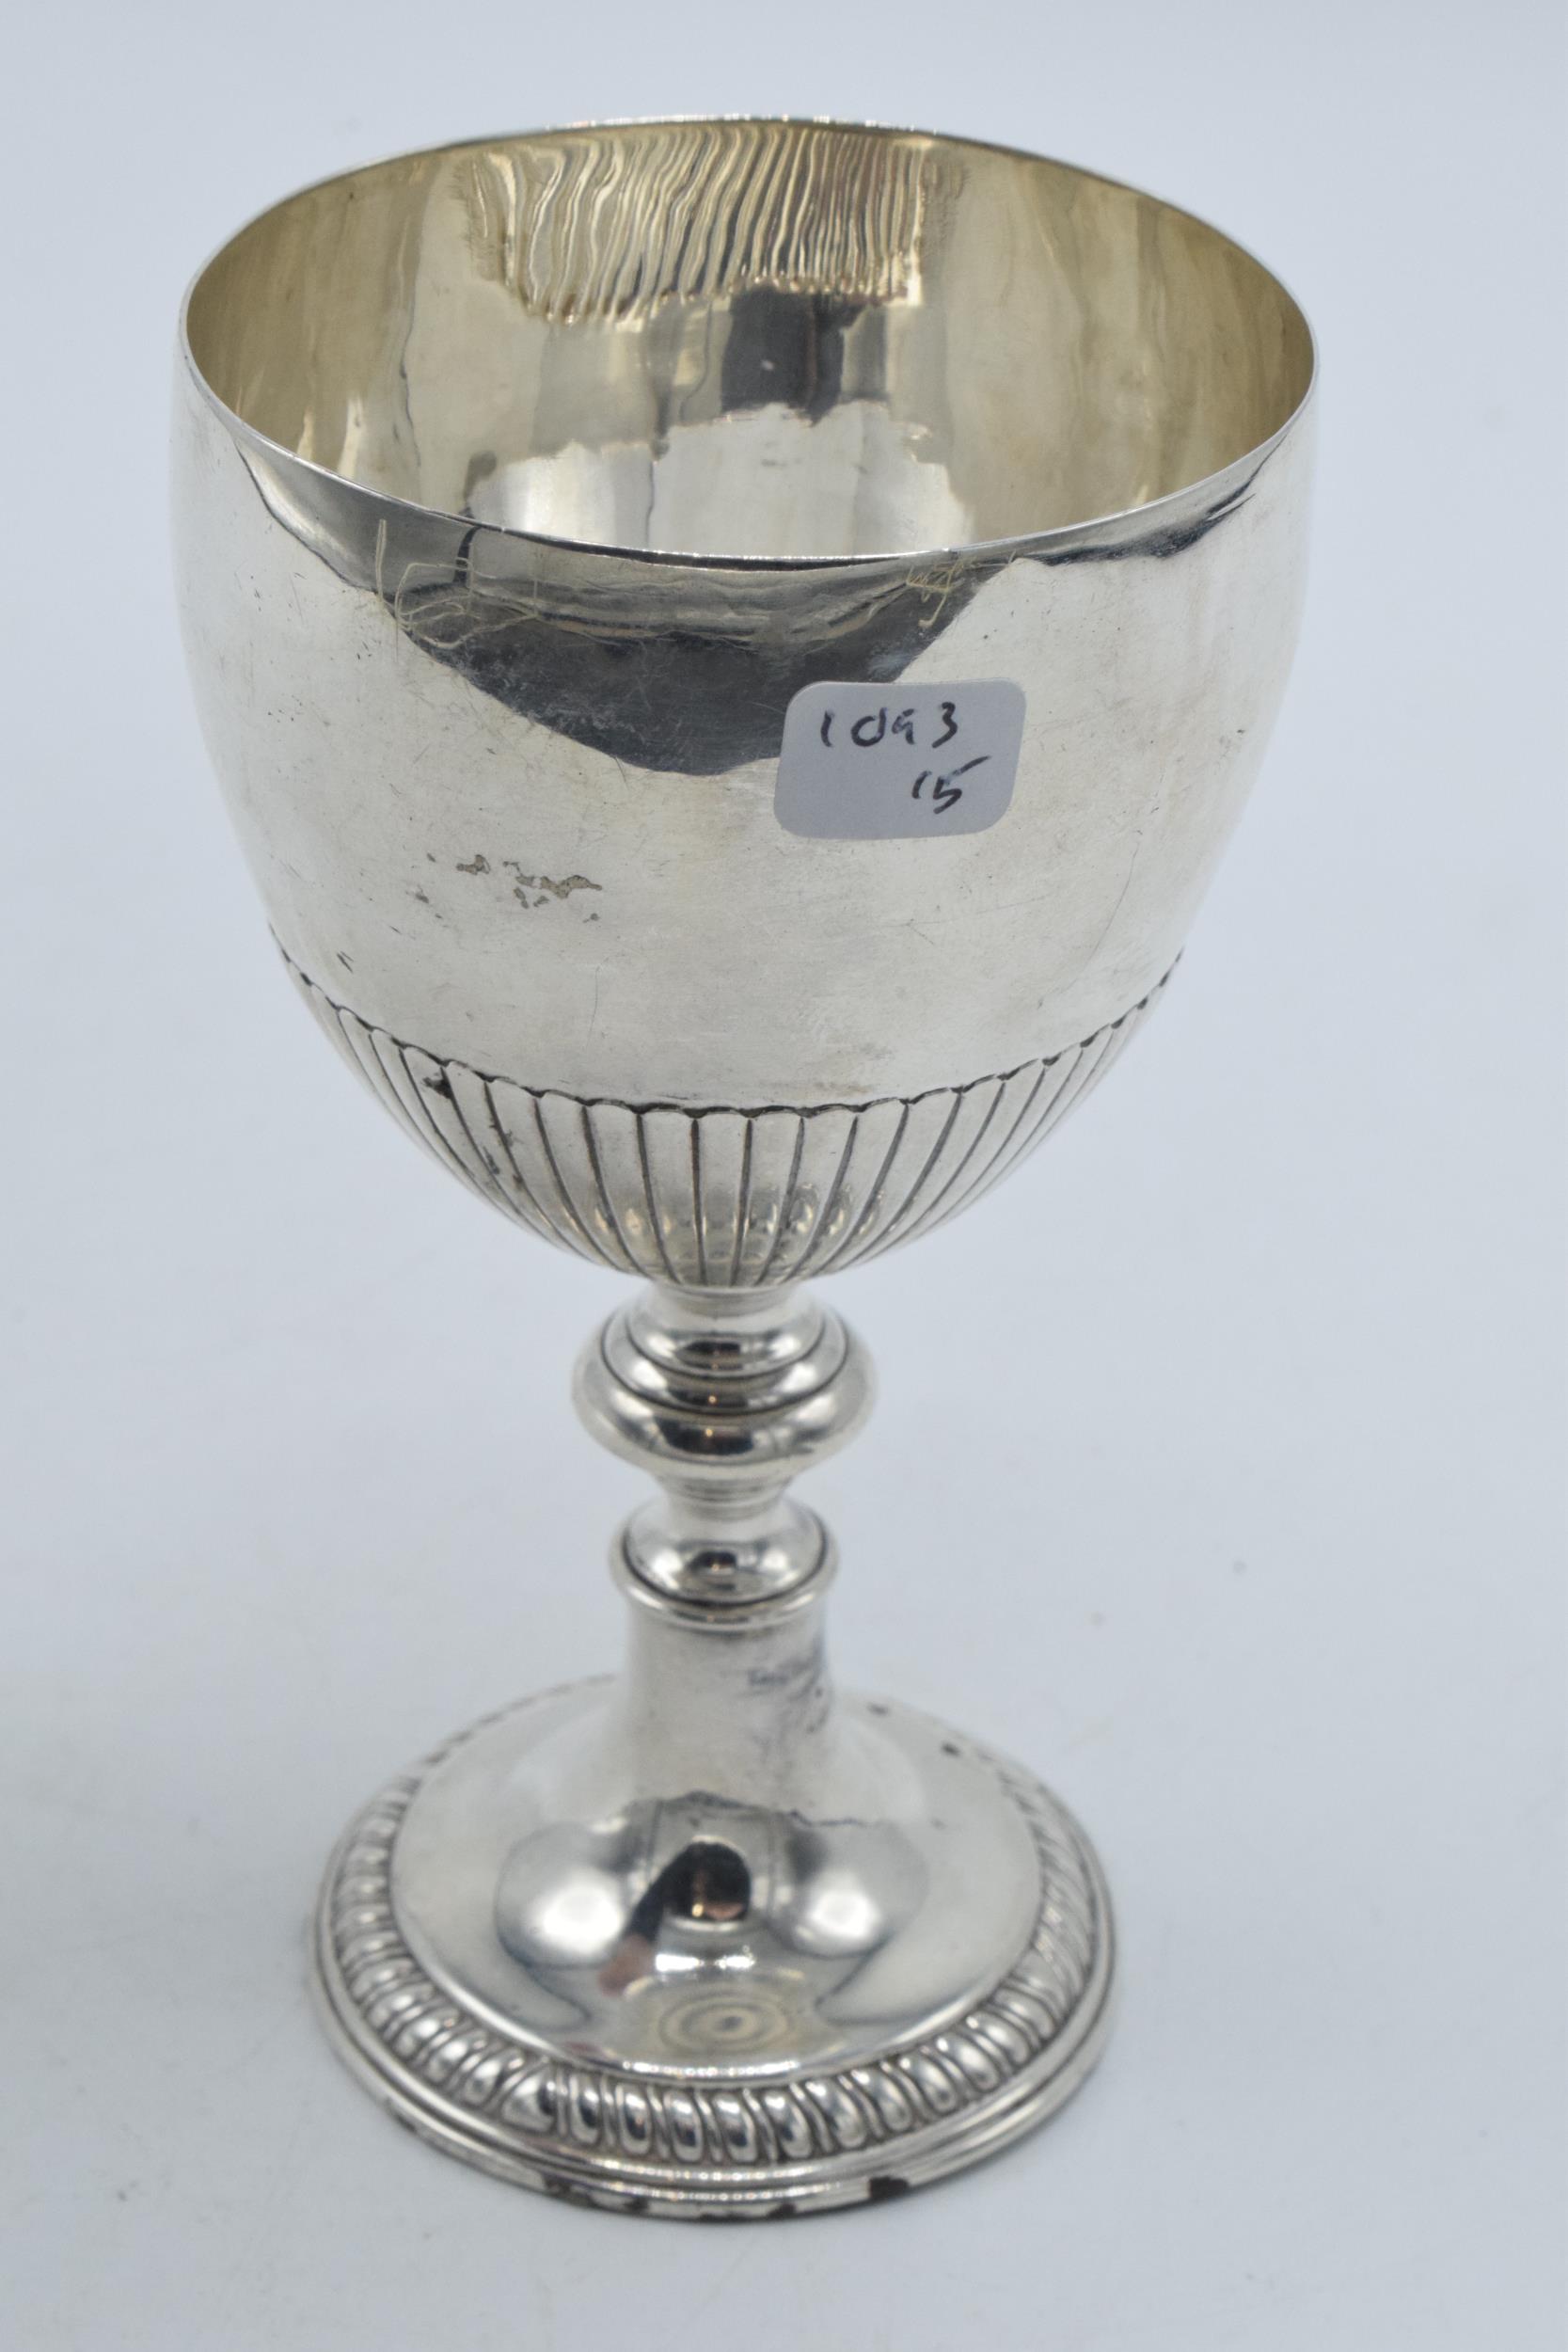 Victorian silver chalice with monogram engraved, 101.2 grams, 11.5cm tall, unhallmarked. - Image 4 of 4